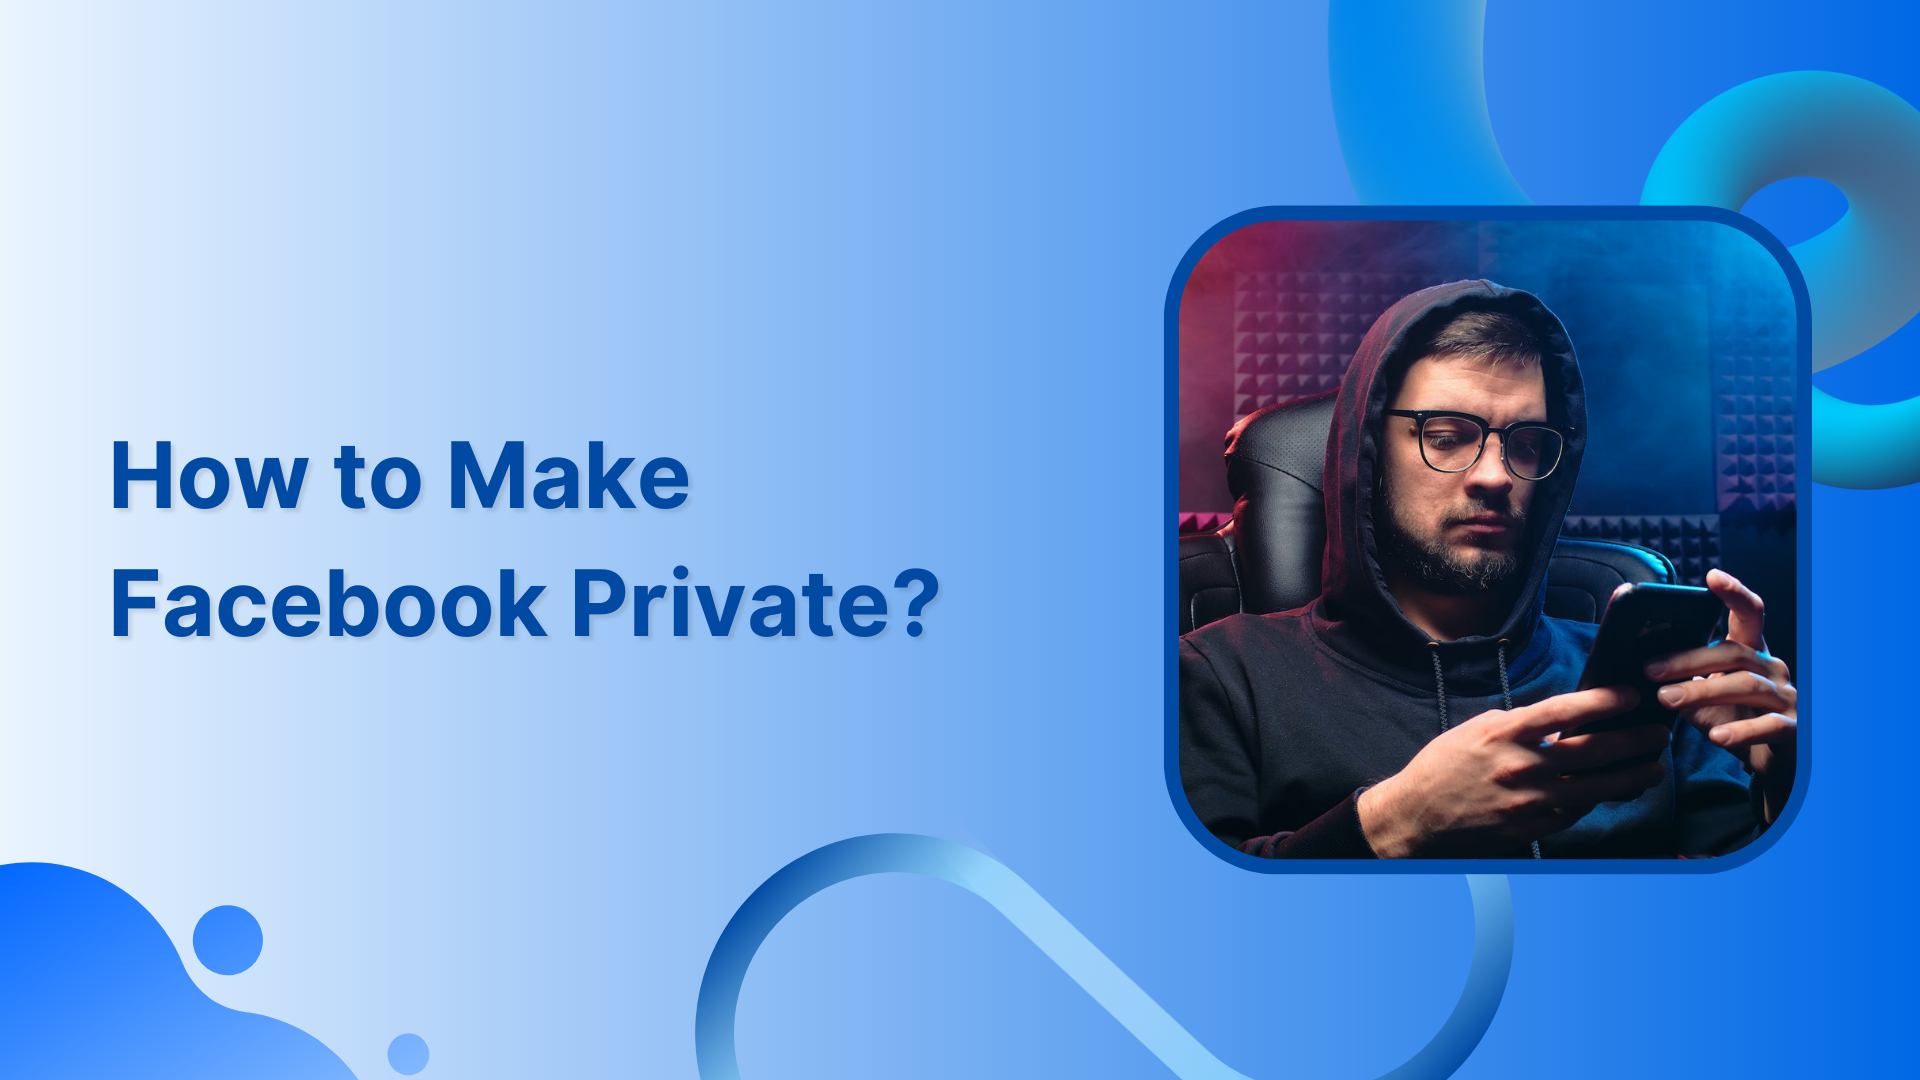 How to Make Facebook Private?